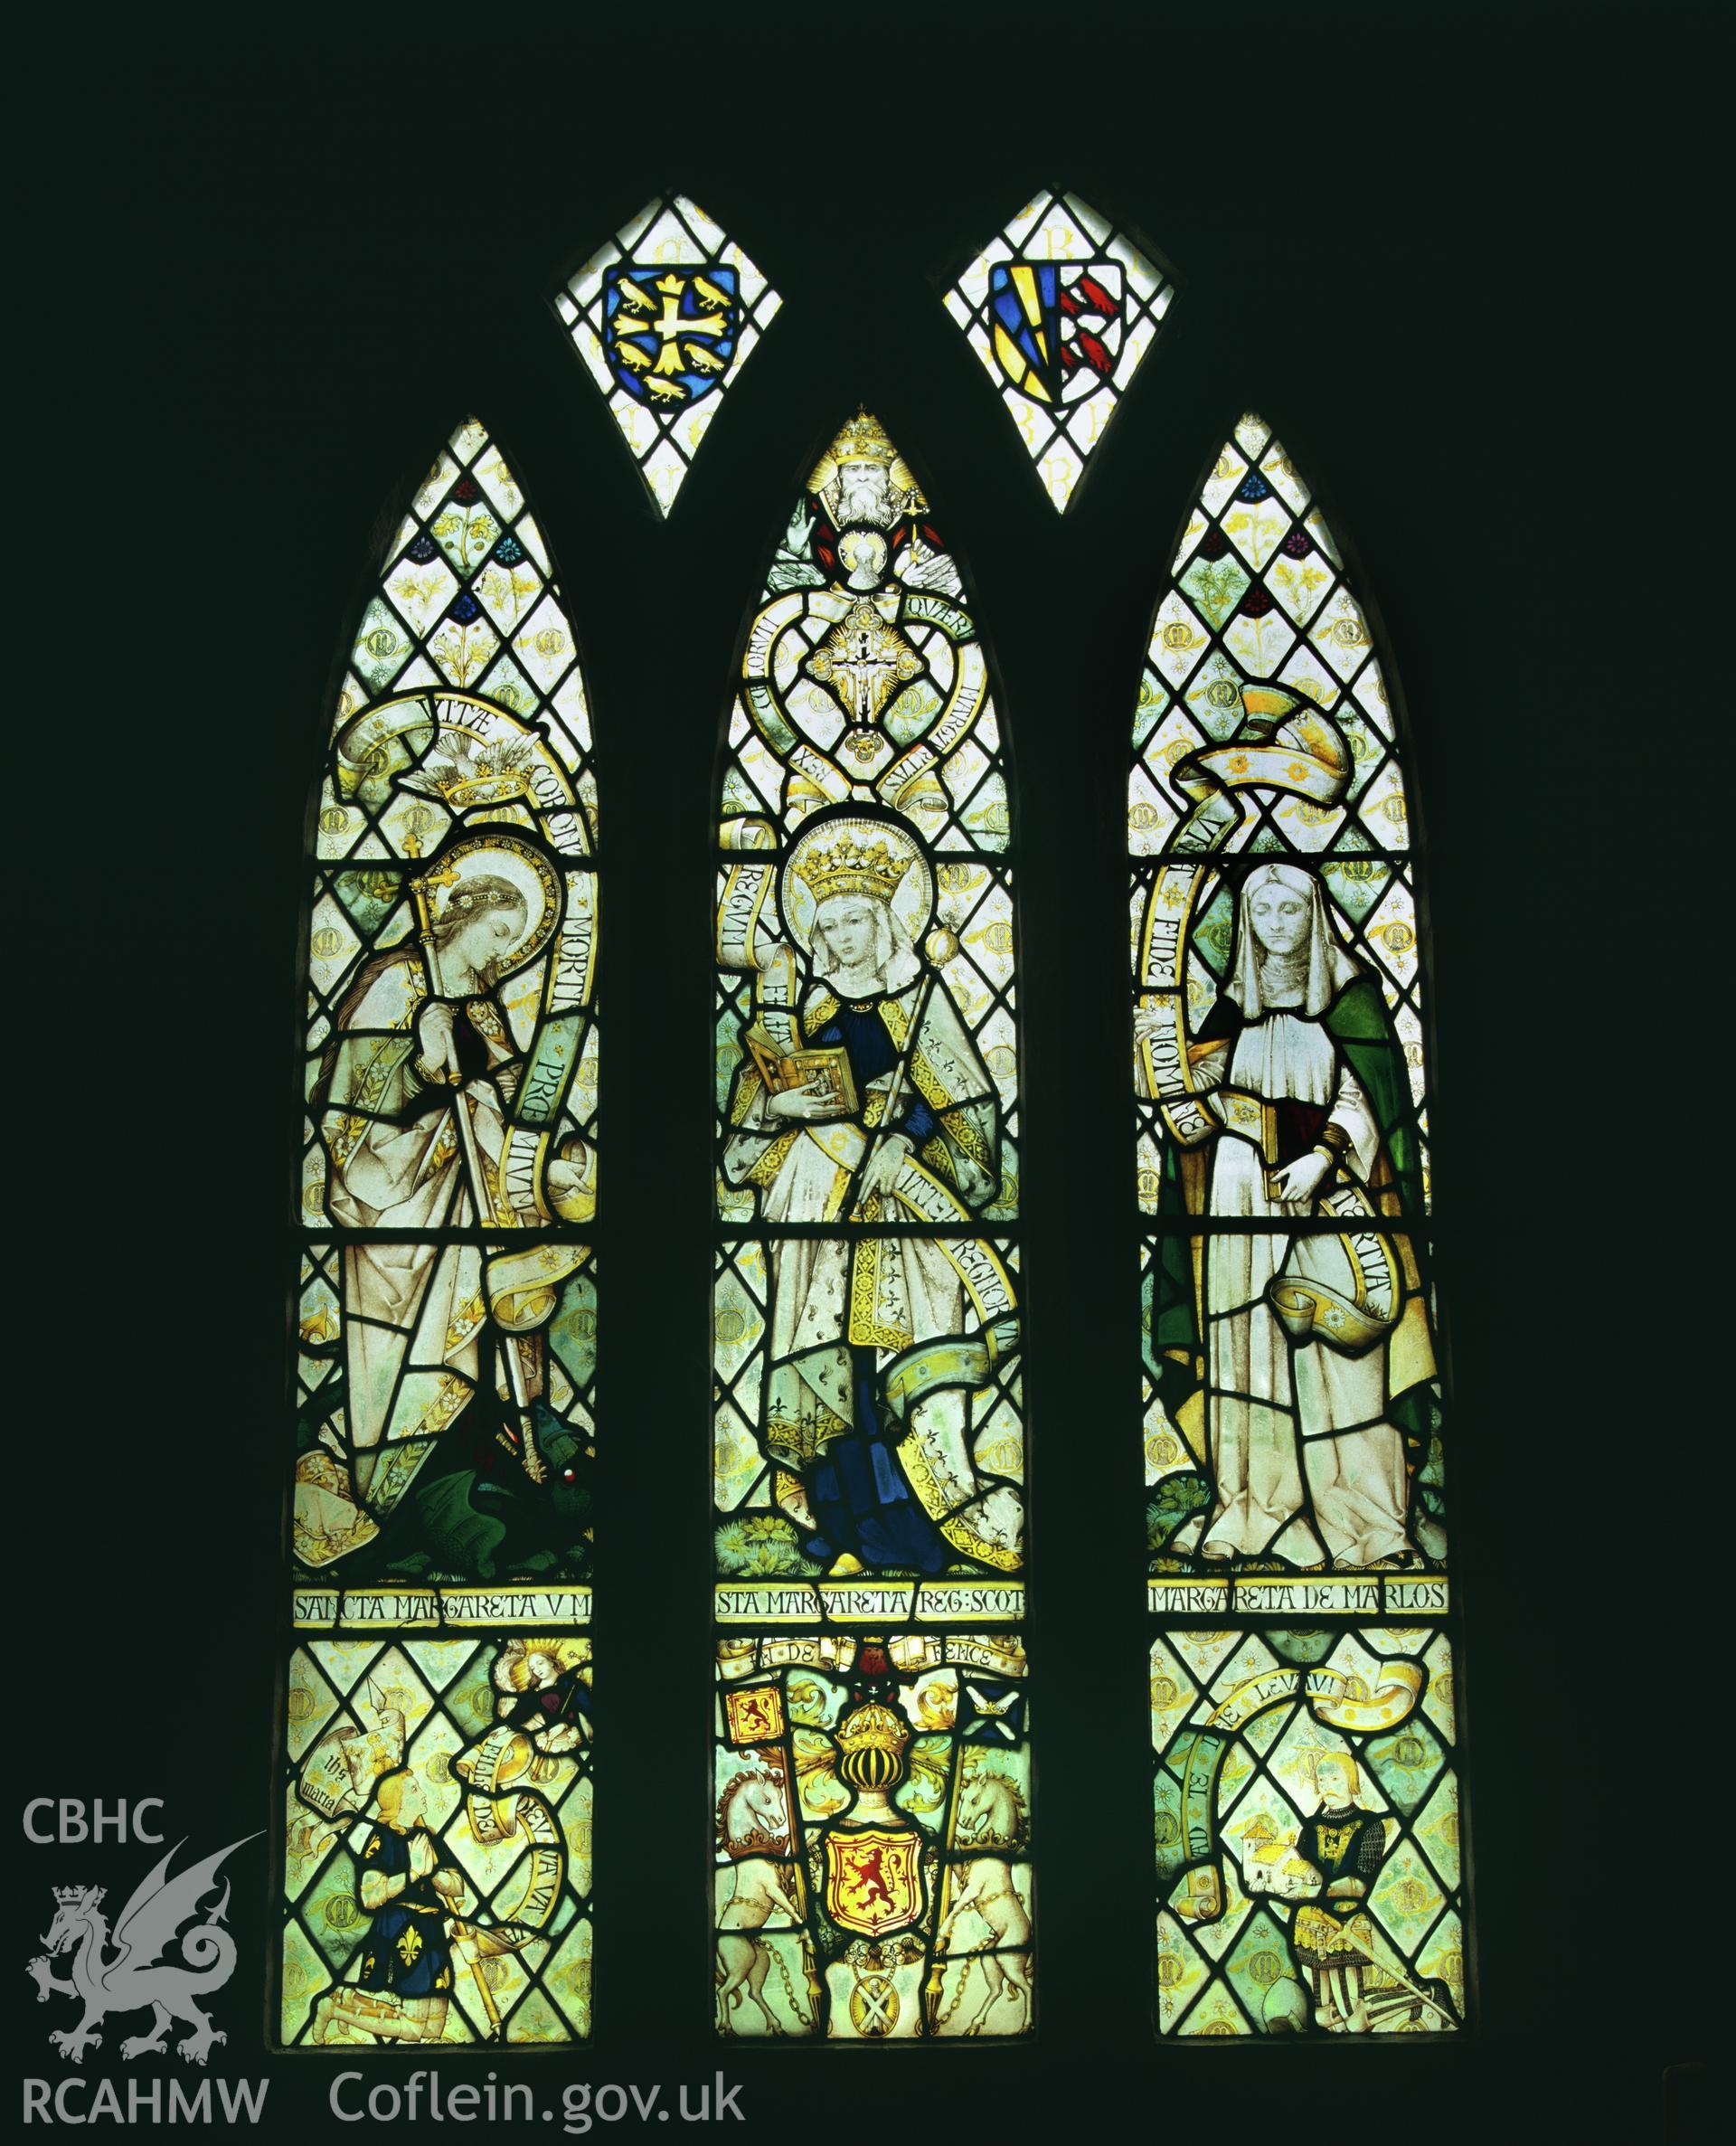 Colour transparency showing stained glass window at St Margarets Church, Eglwyscummin, produced by Iain Wright, June 2004